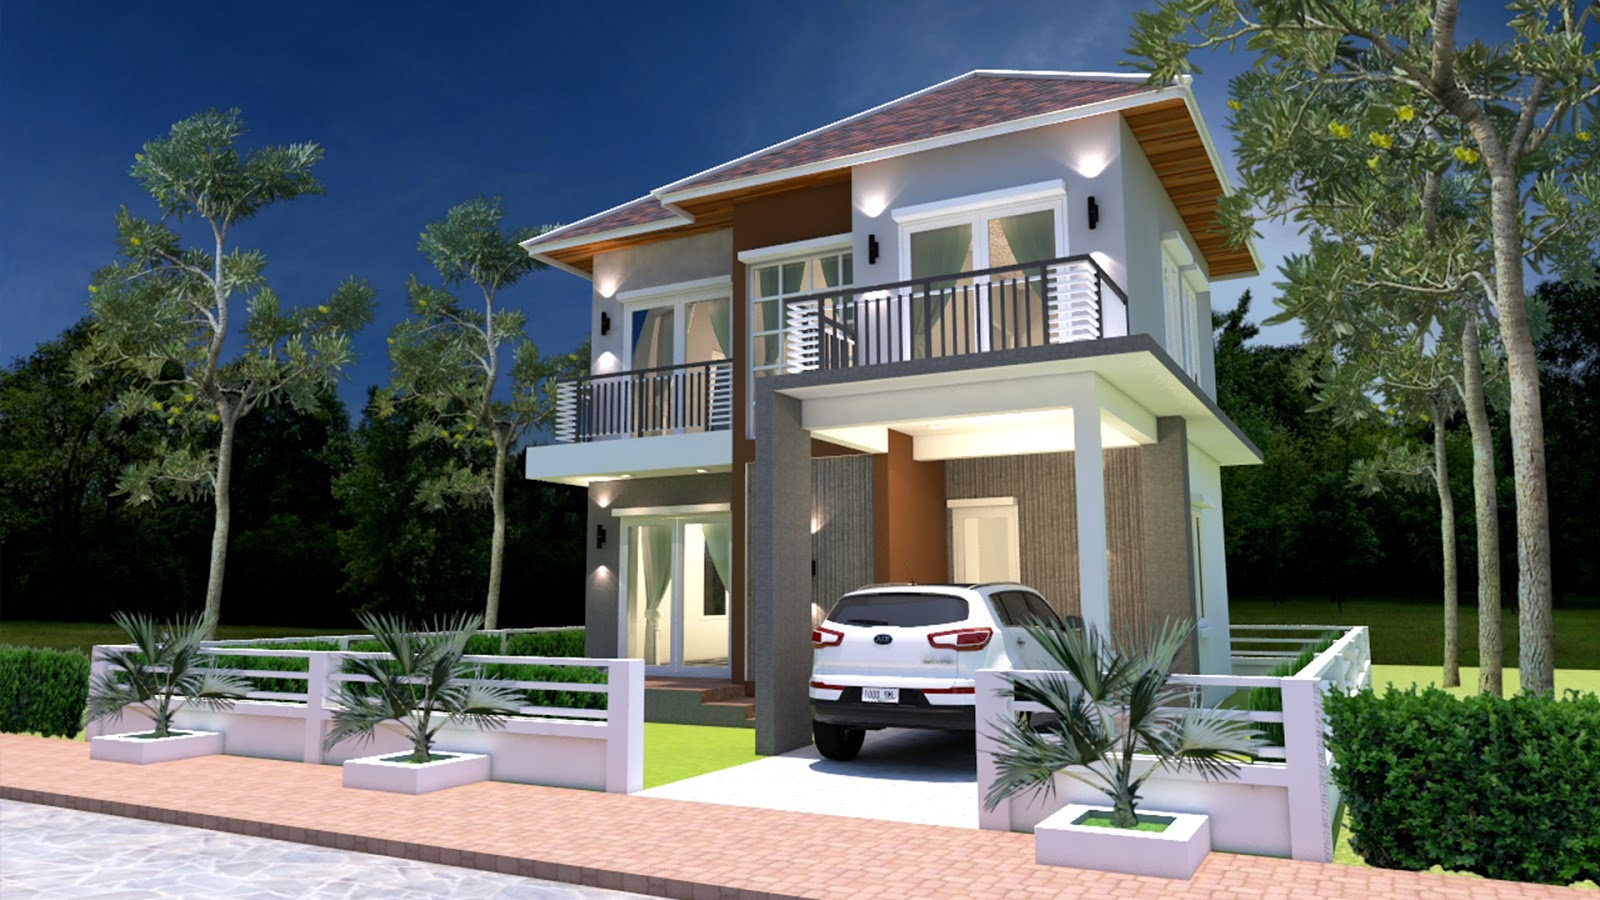  Sketchup  Home  Plan  8x8m with 3 Bedrooms House  Plan  Map